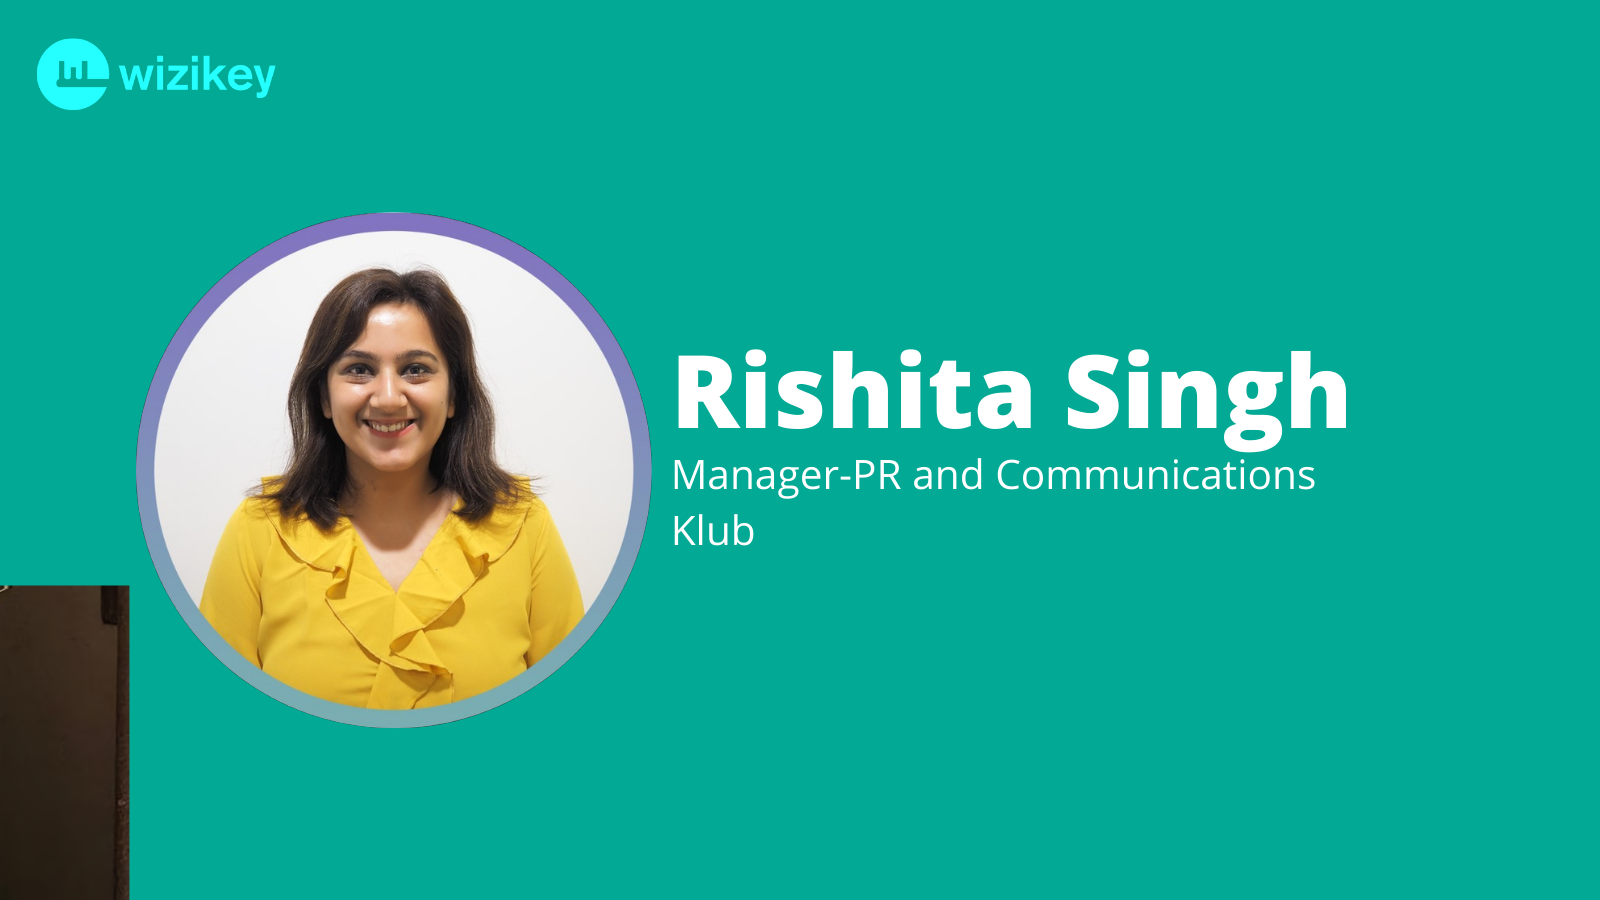 Data is important in creating a long-lasting story: Rishita from Klub